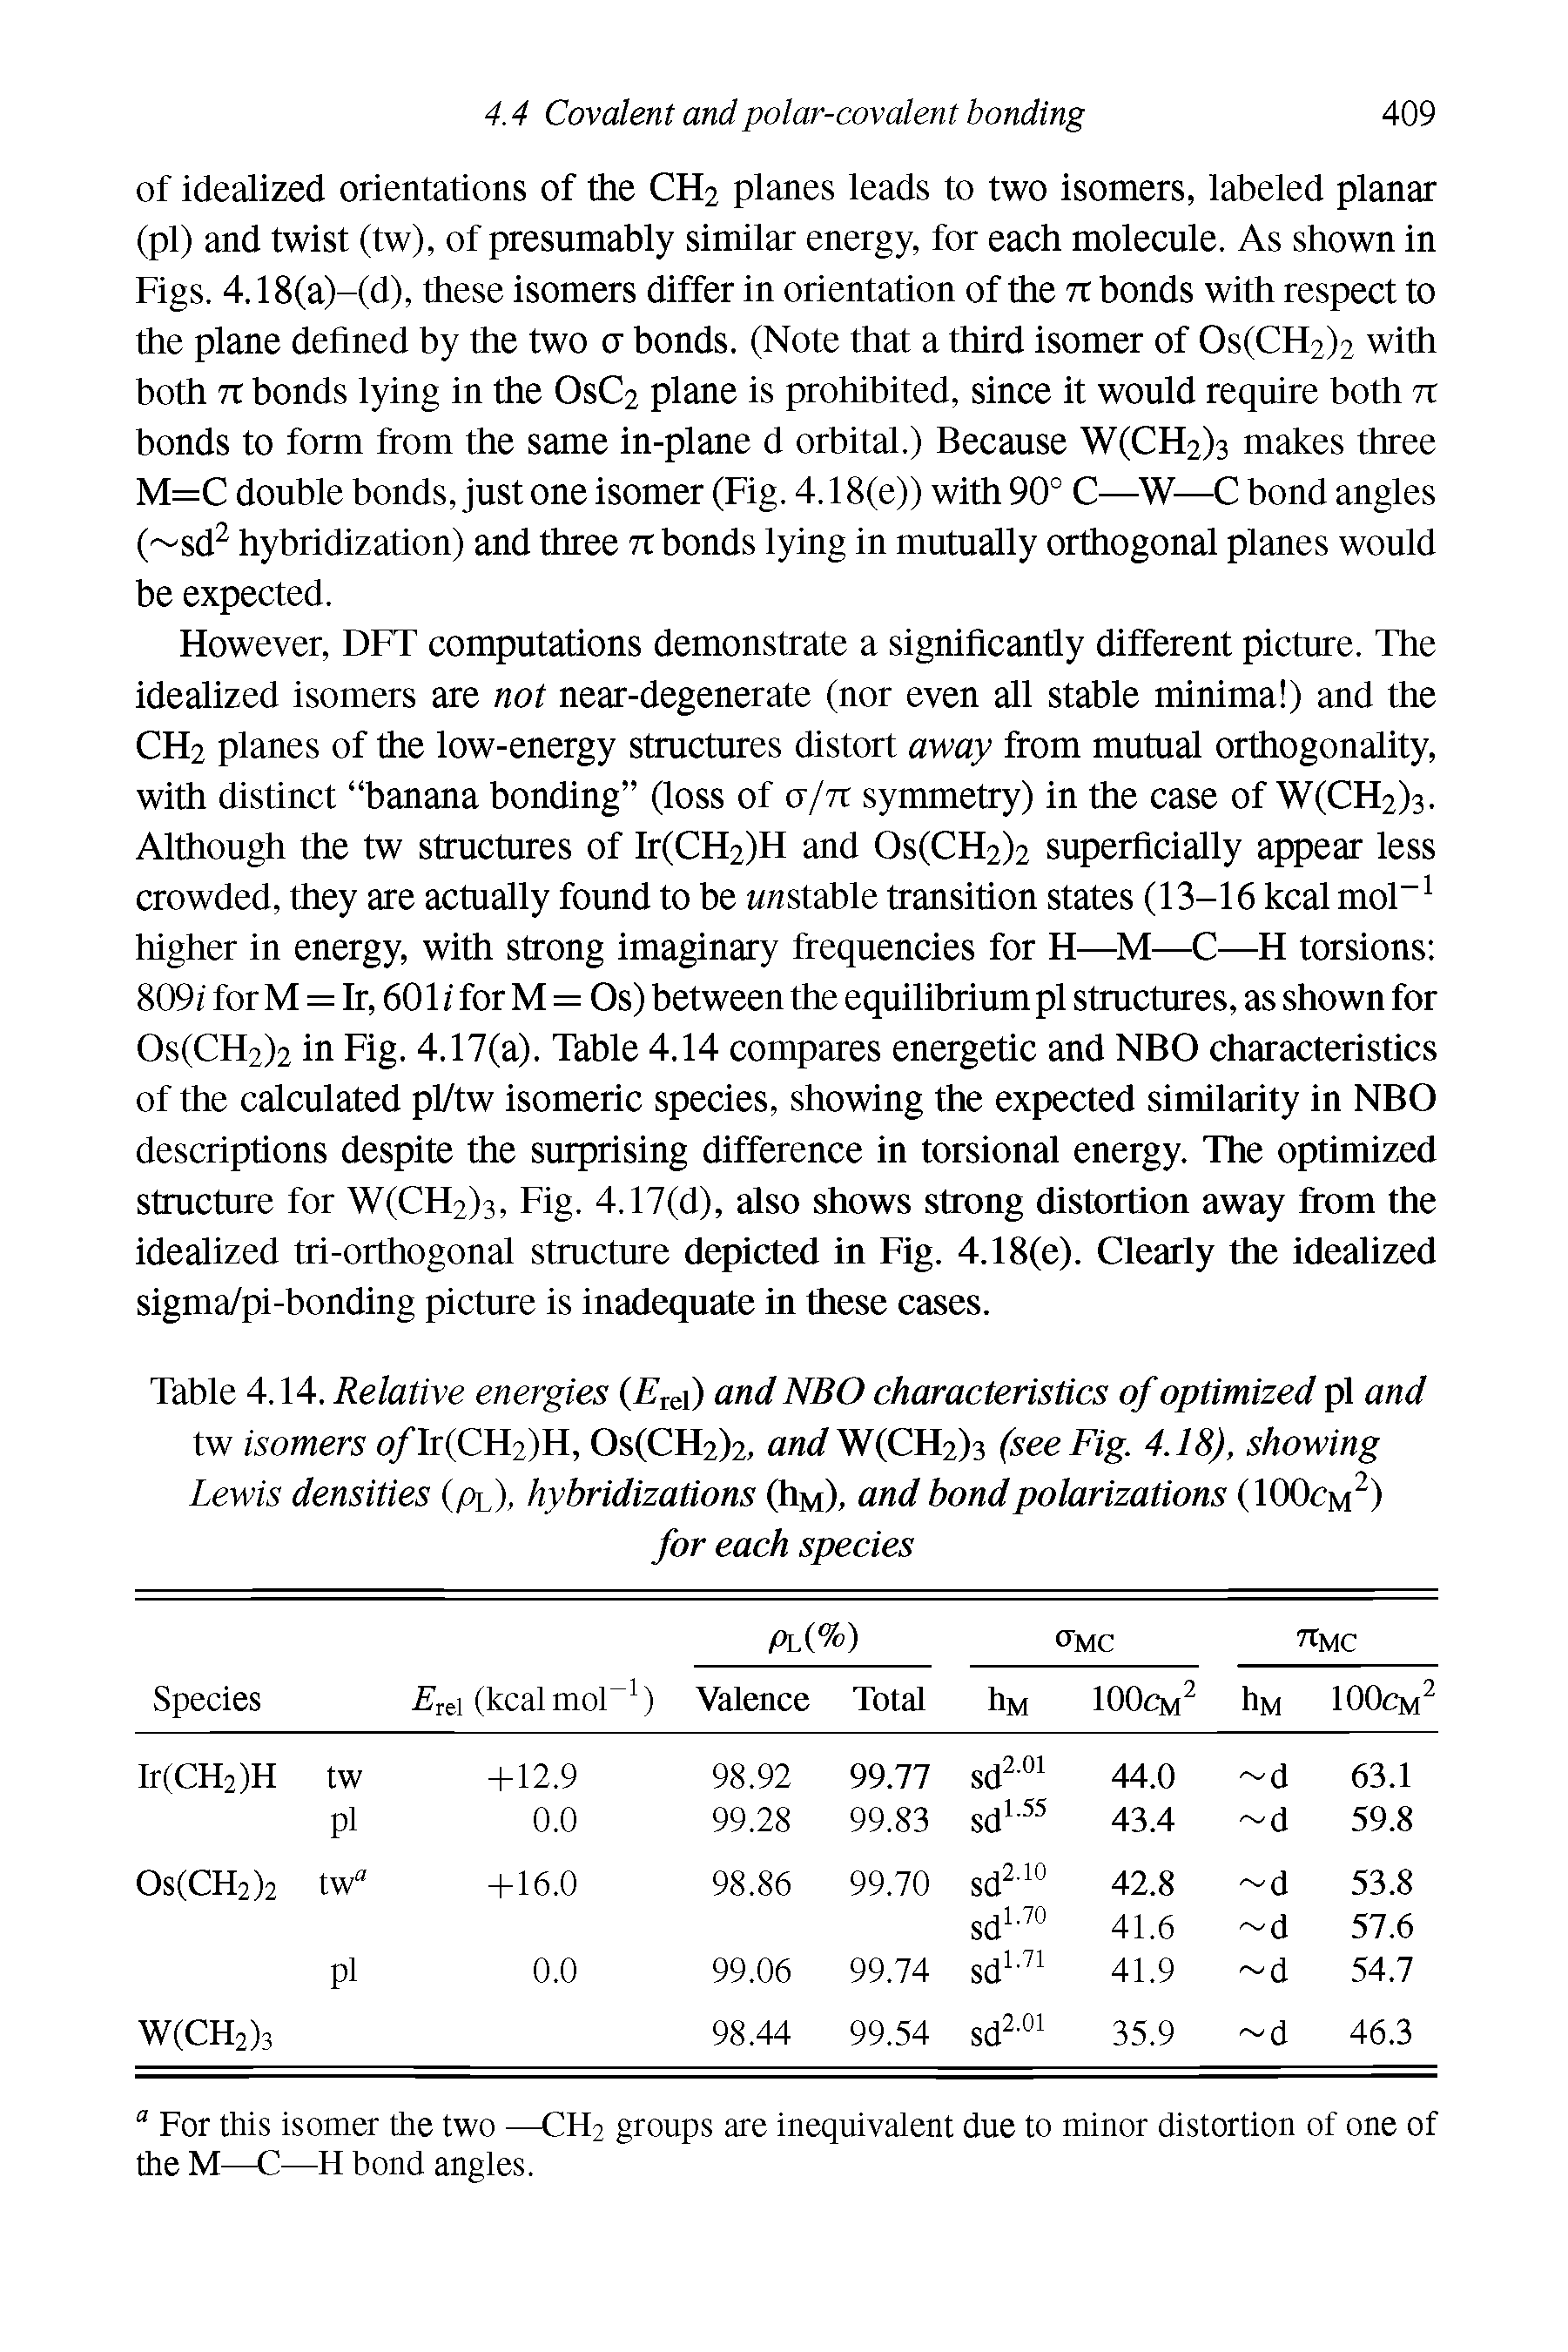 Table 4.14. Relative energies (/srei) and NBO characteristics of optimized pi and tw isomers o/Ir(CH2)H, Os(CH2)2, and W(CH2)3 (see Fig. 4.18), showing Lewis densities (pf), hybridizations (Iim), and bond polarizations (100cm2)...